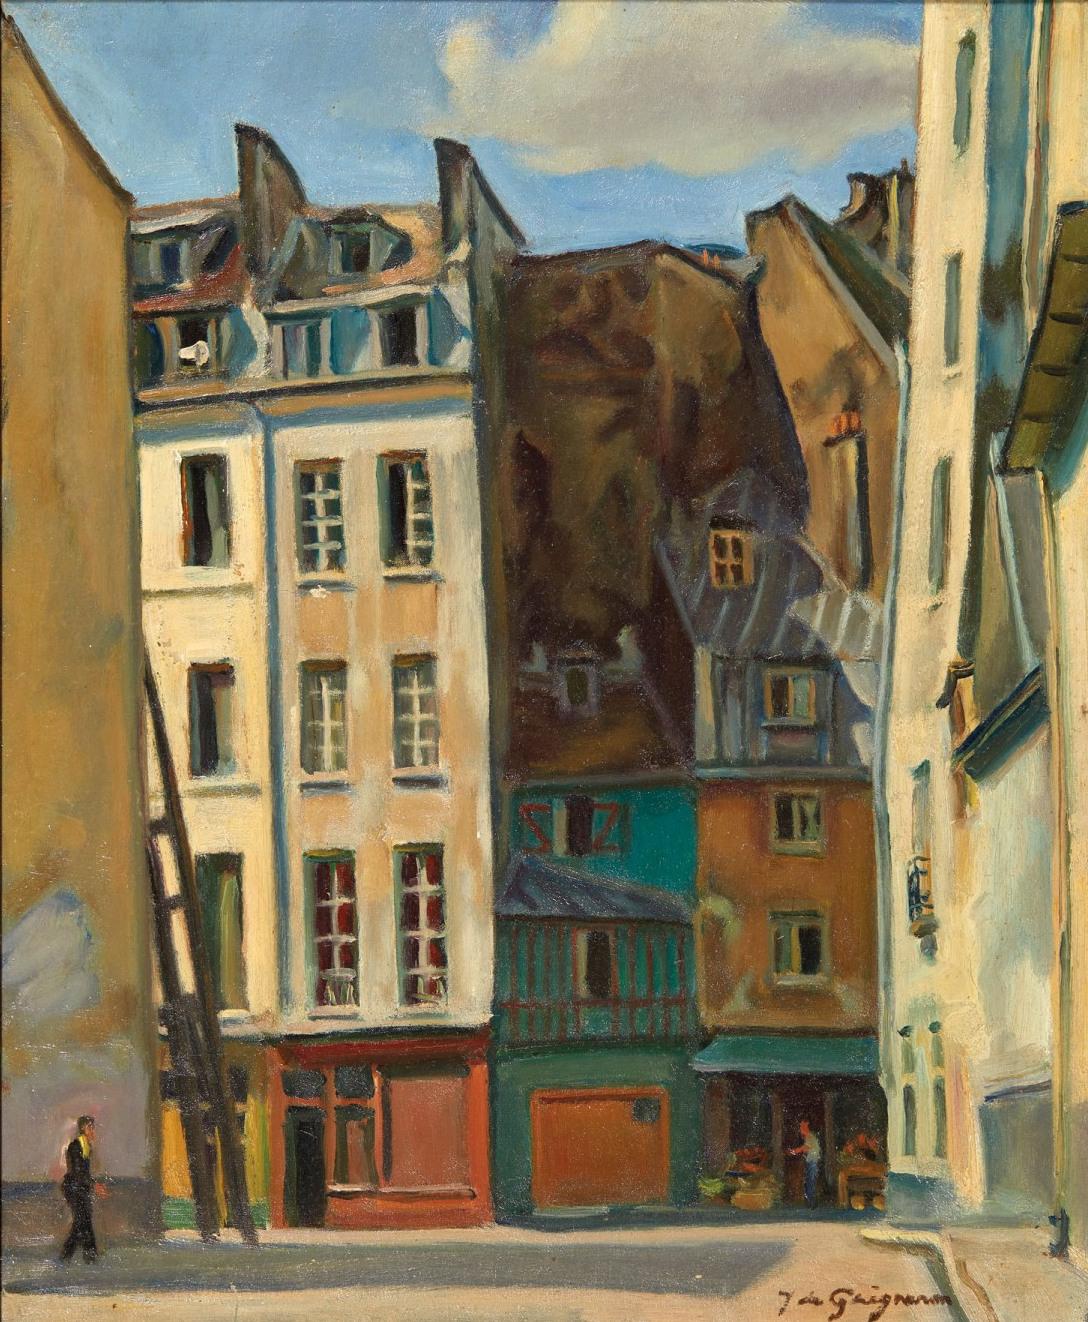 Jean de Gaigneron (1890-1976)
A Street in Paris
Signed lower right
Oil on canvas
46 x 38 cm
Original frame :  50 x 42 cm
Provenance : Estate of the Artist

Jean de Gaigneron, the youngest son of the second marriage of Viscount Marie Paul Philippe